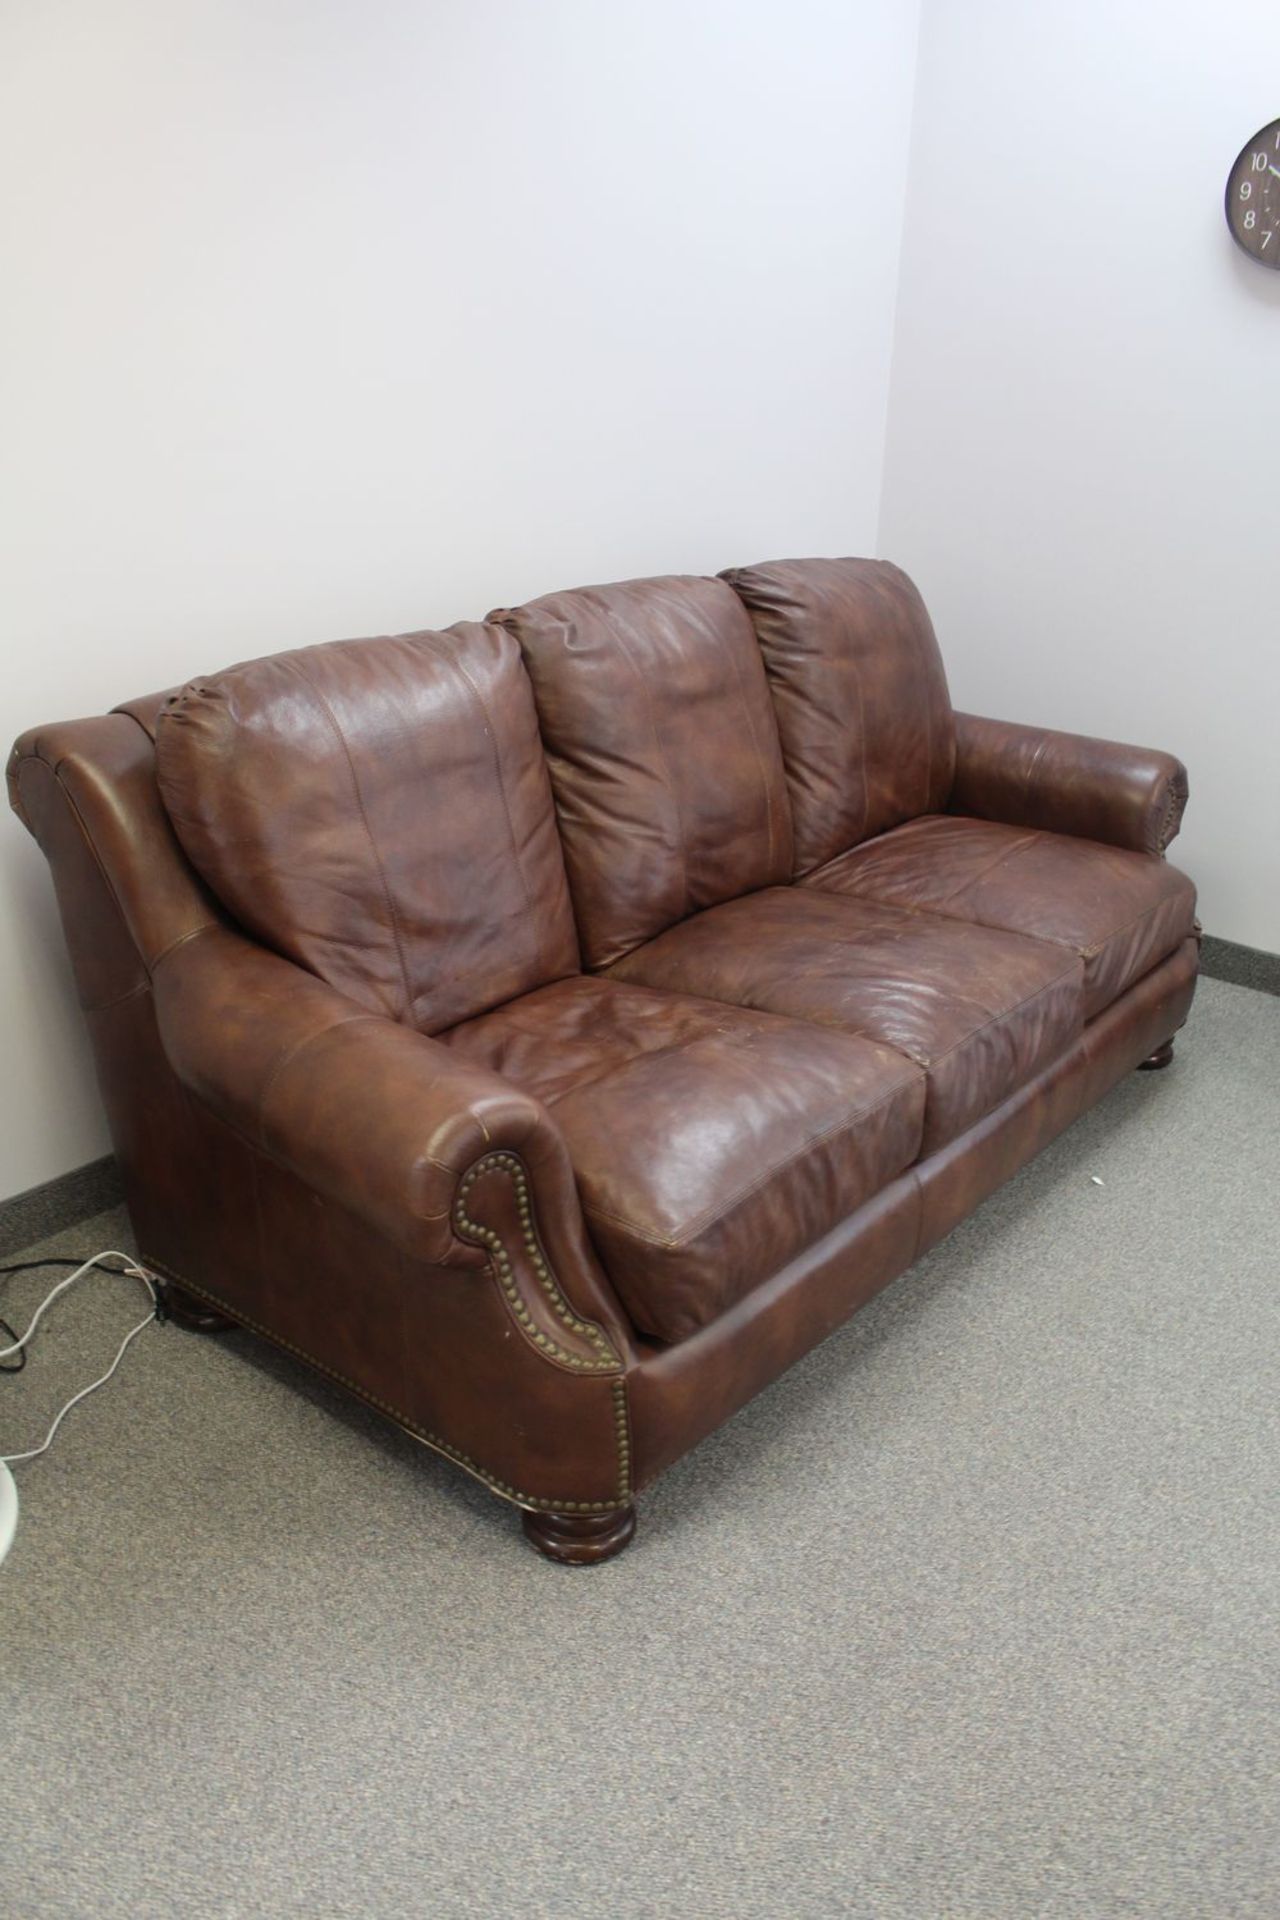 BROWN LEATHER 3-SEAT SOFA W/ STUDS - 88"L X 45"D X 36"H (LOCATED AT: NIAGARA ON-THE-LAKE, ONTARIO - Image 3 of 3